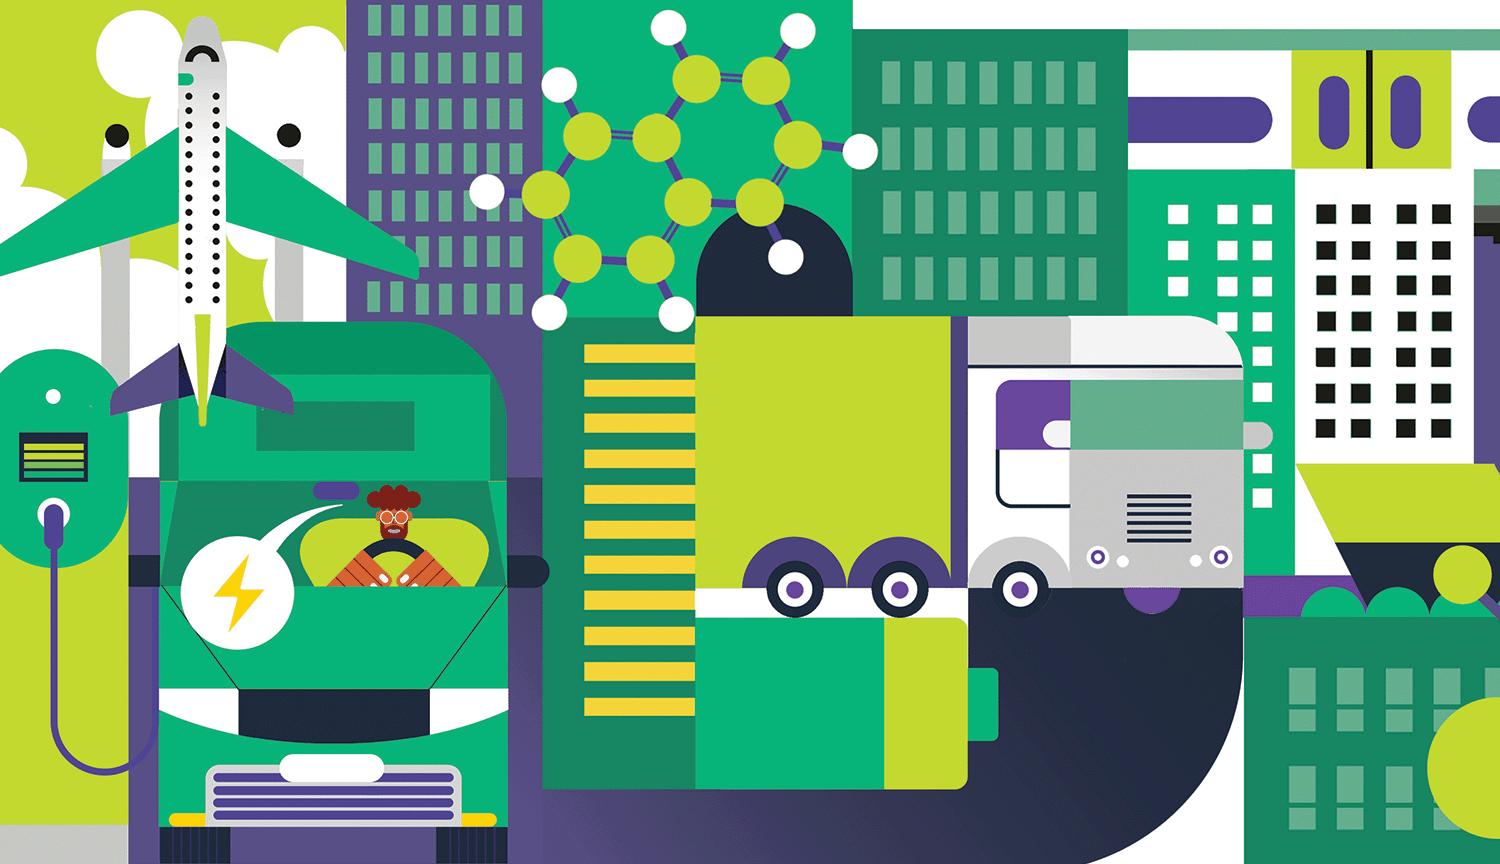 Conceptual illustration shows various modes of transport, colored green: ships, trucks, trains, cars, planes. A couple of fuel molecules — hydrogen gas and kerosene — are also incorporated into the illo.